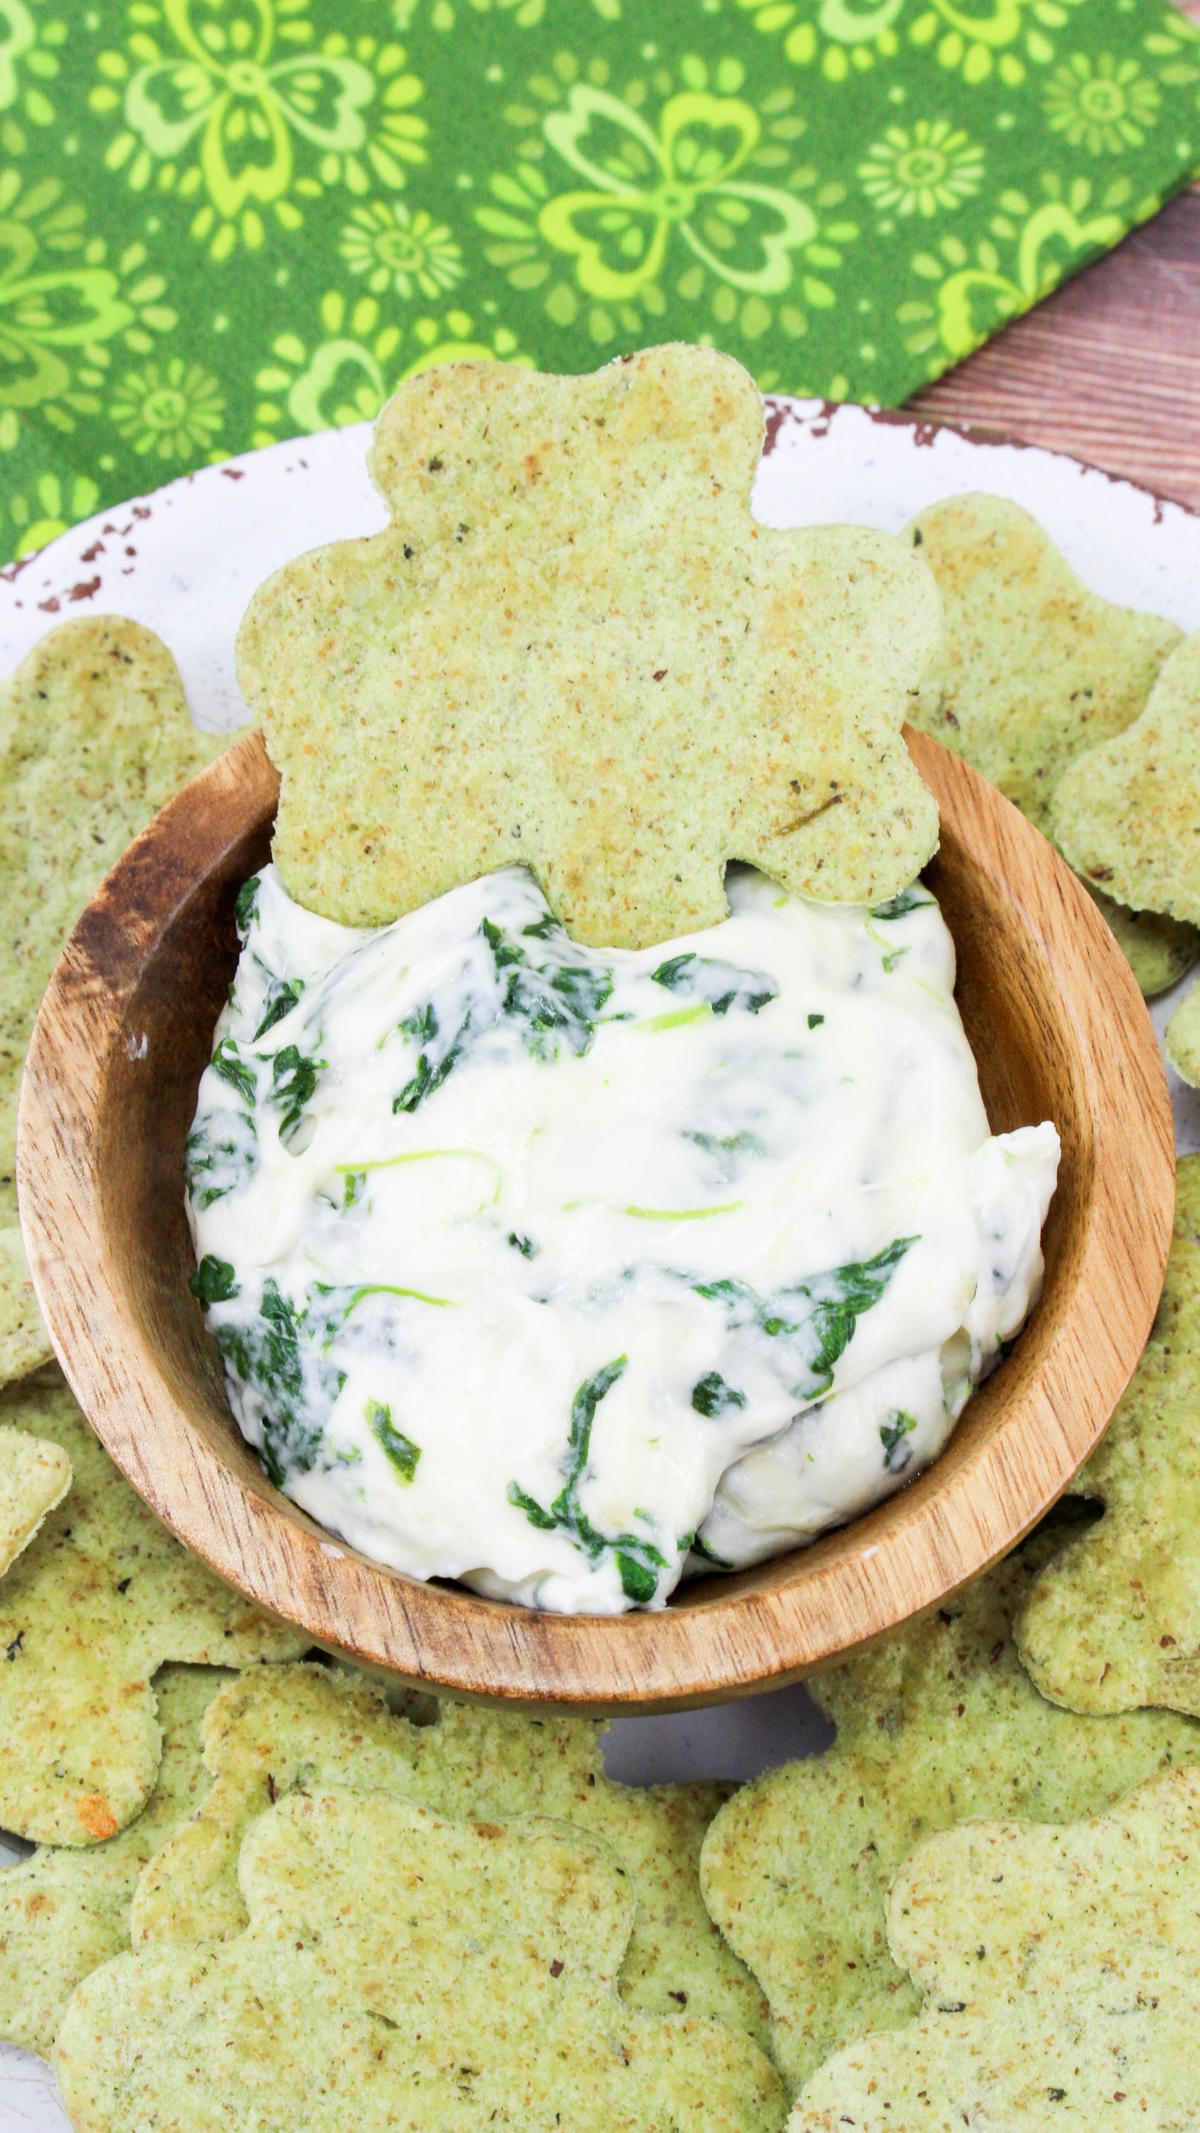 4-leaf clover chip dipped into the spinach dip.